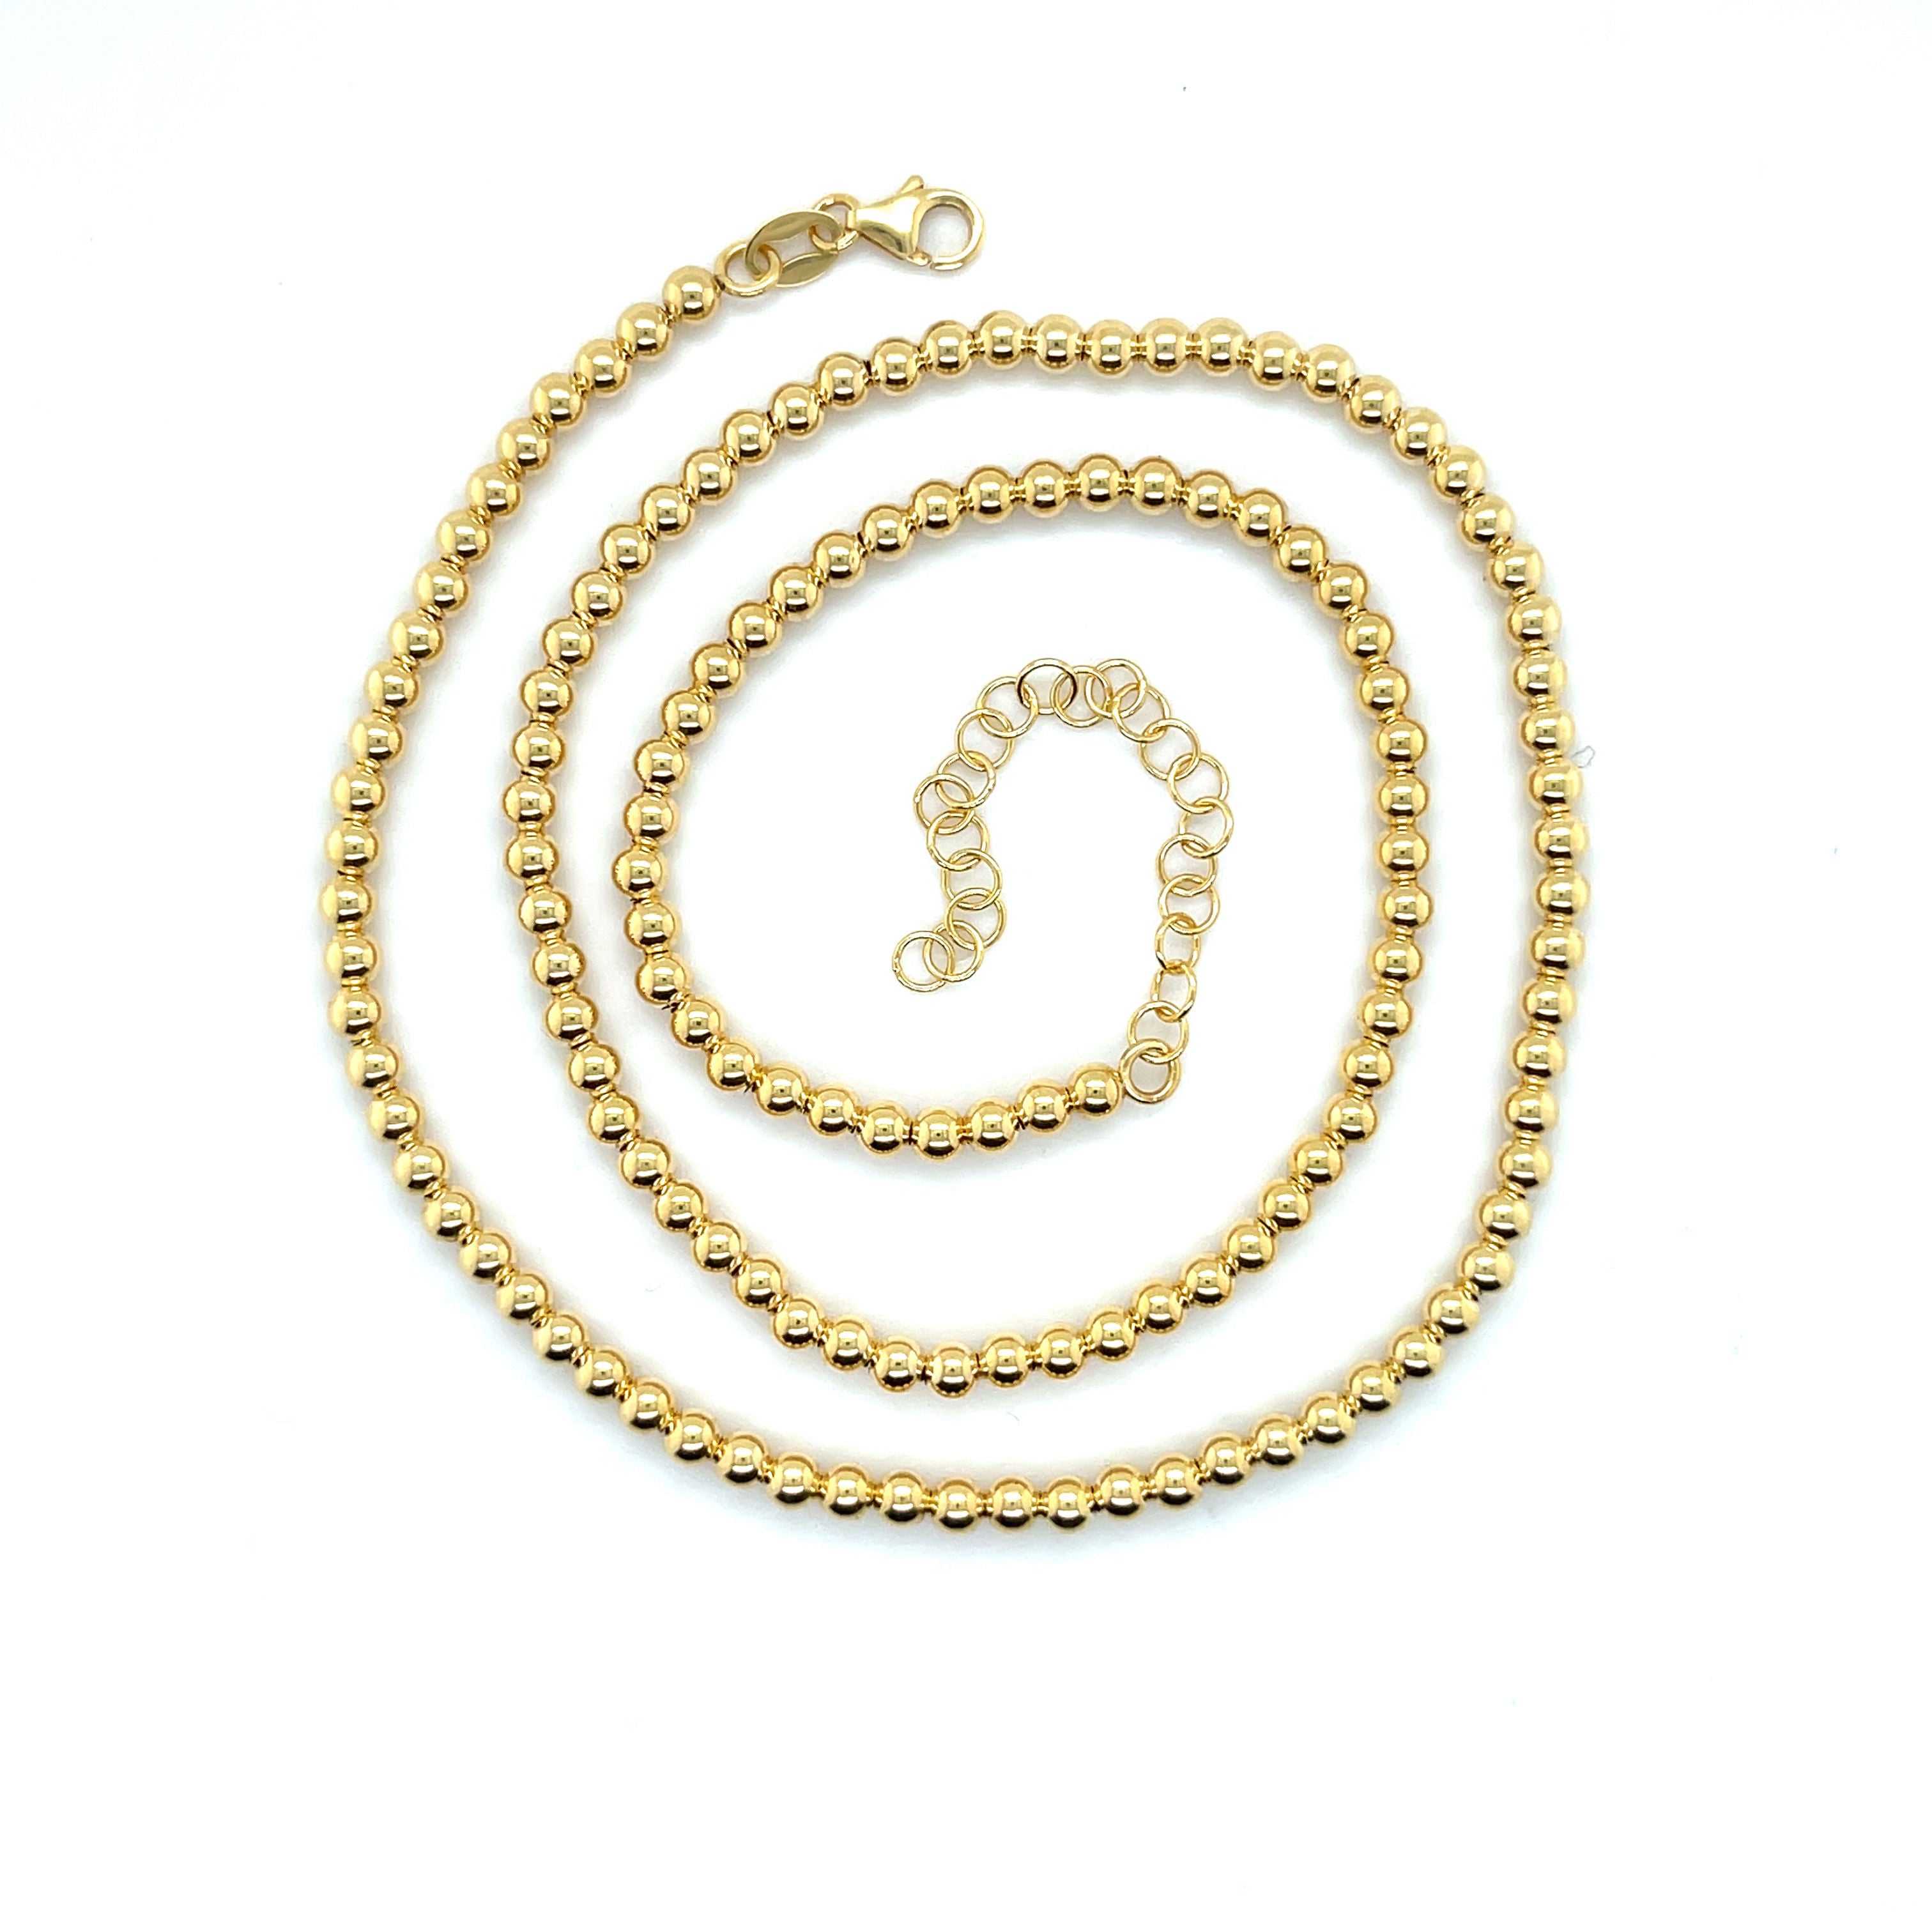 14k Gold 3mm Ball Necklace